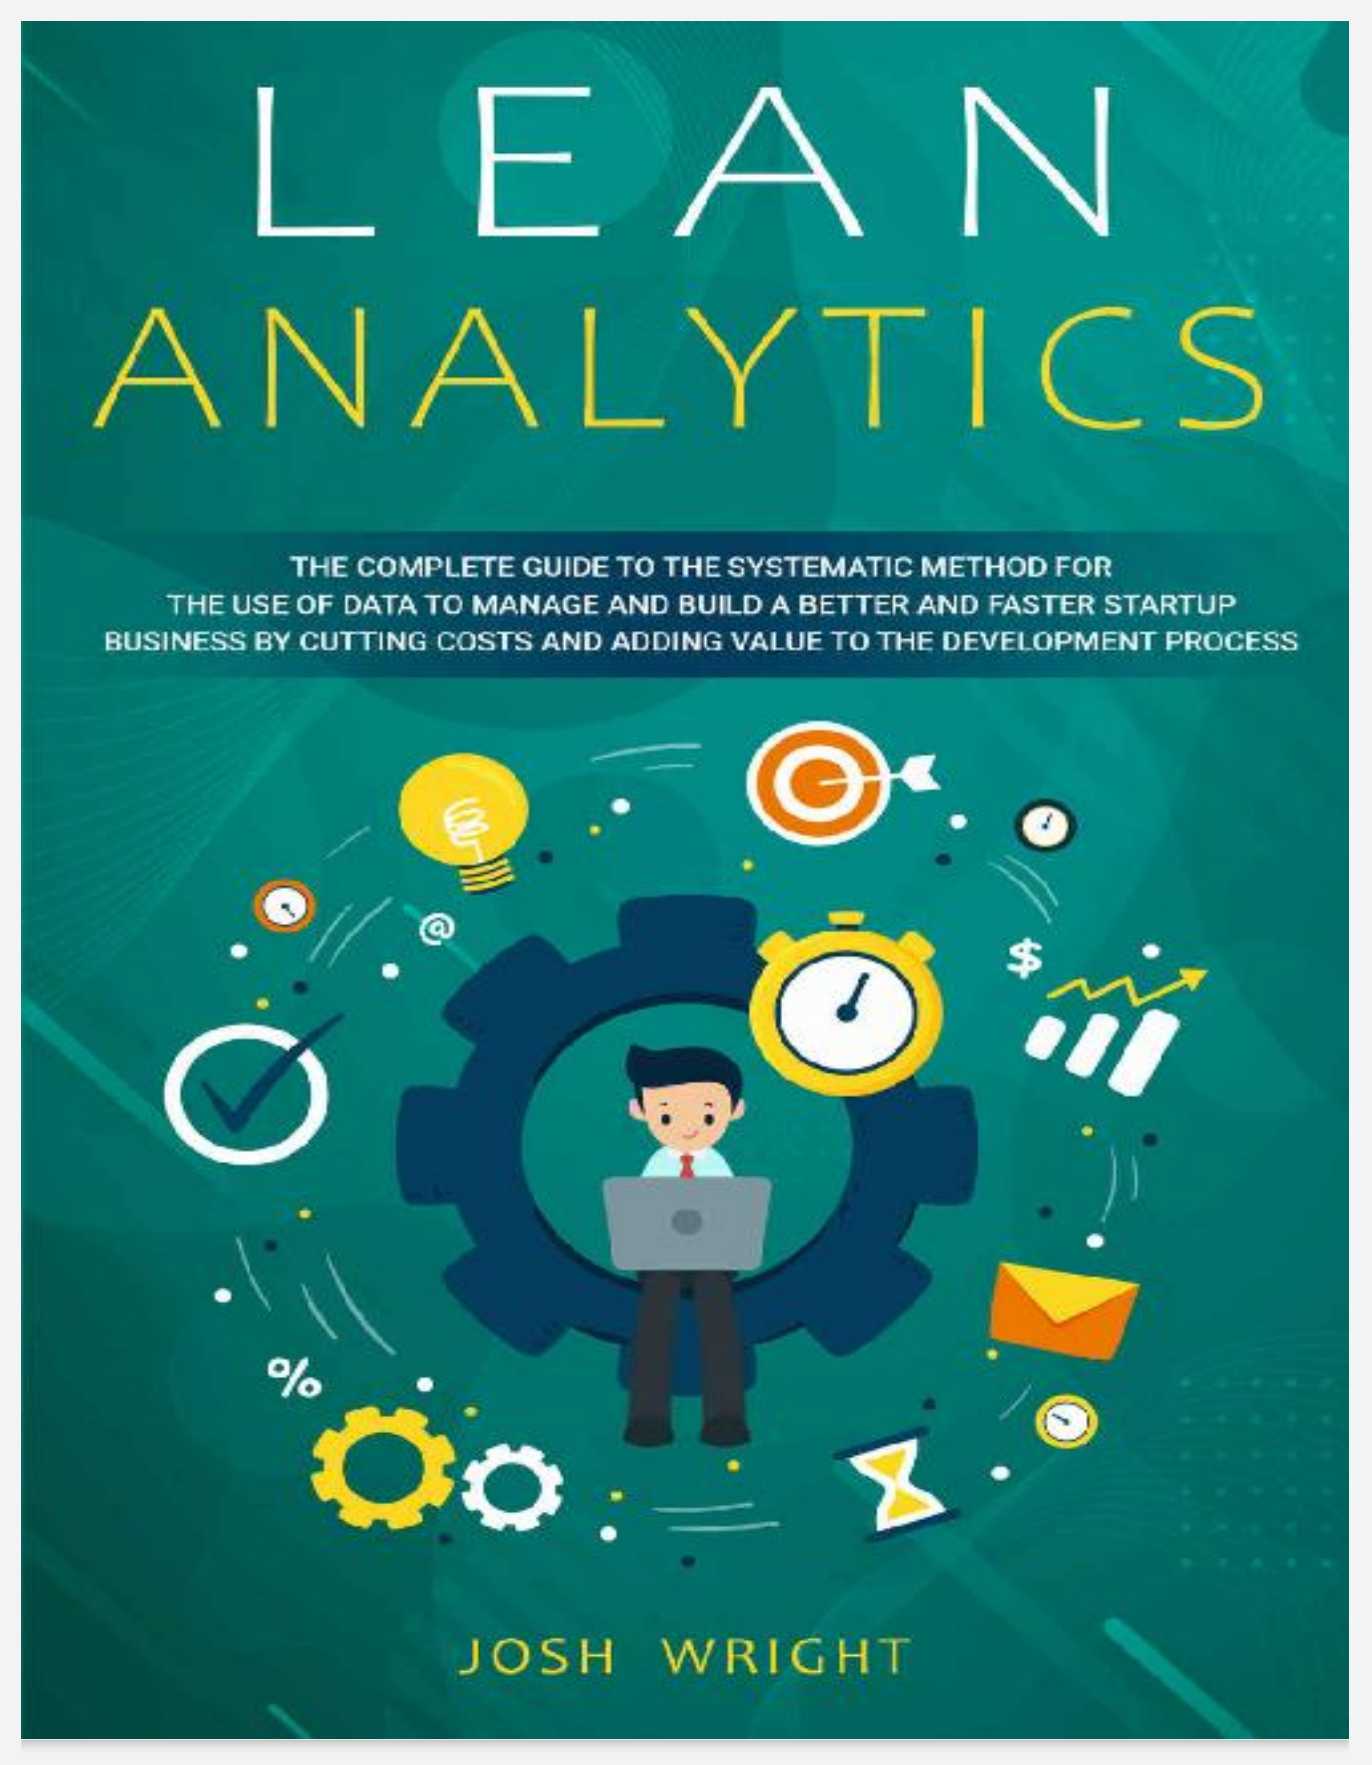 Lean Analytics The Complete Guide to the Systematic Method for the Use of Data